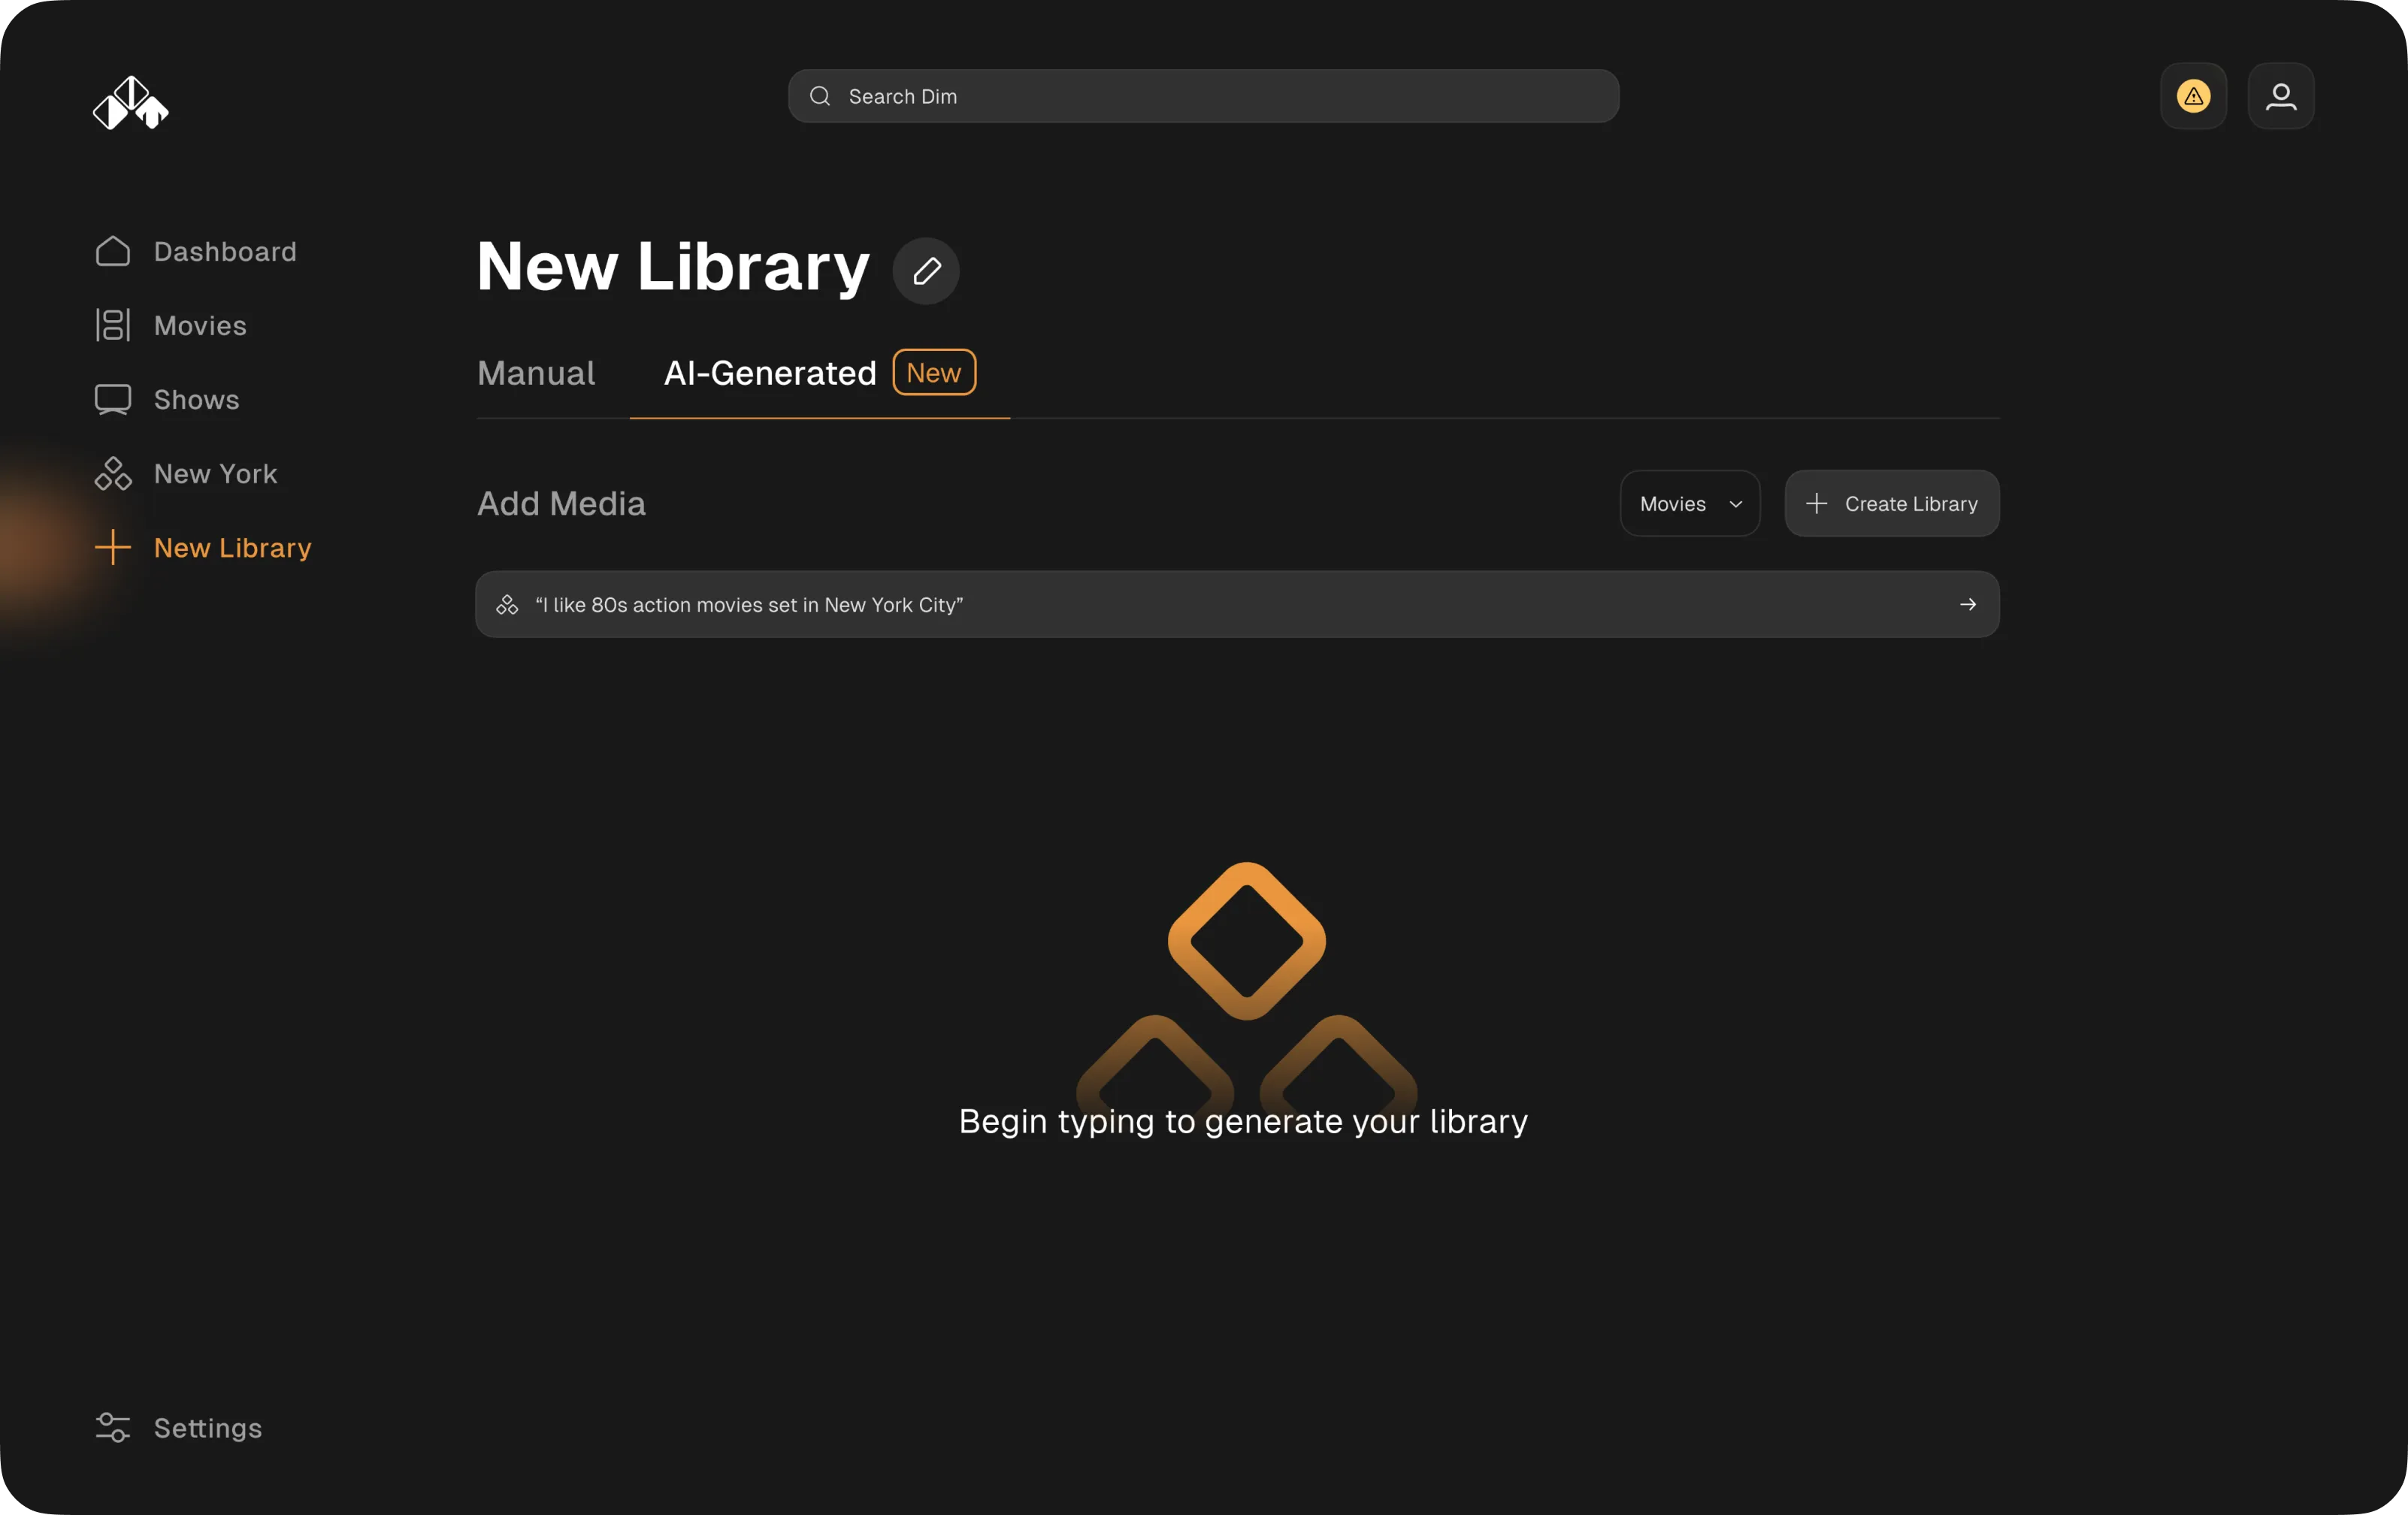 UI of a new library creation screen for a streaming service